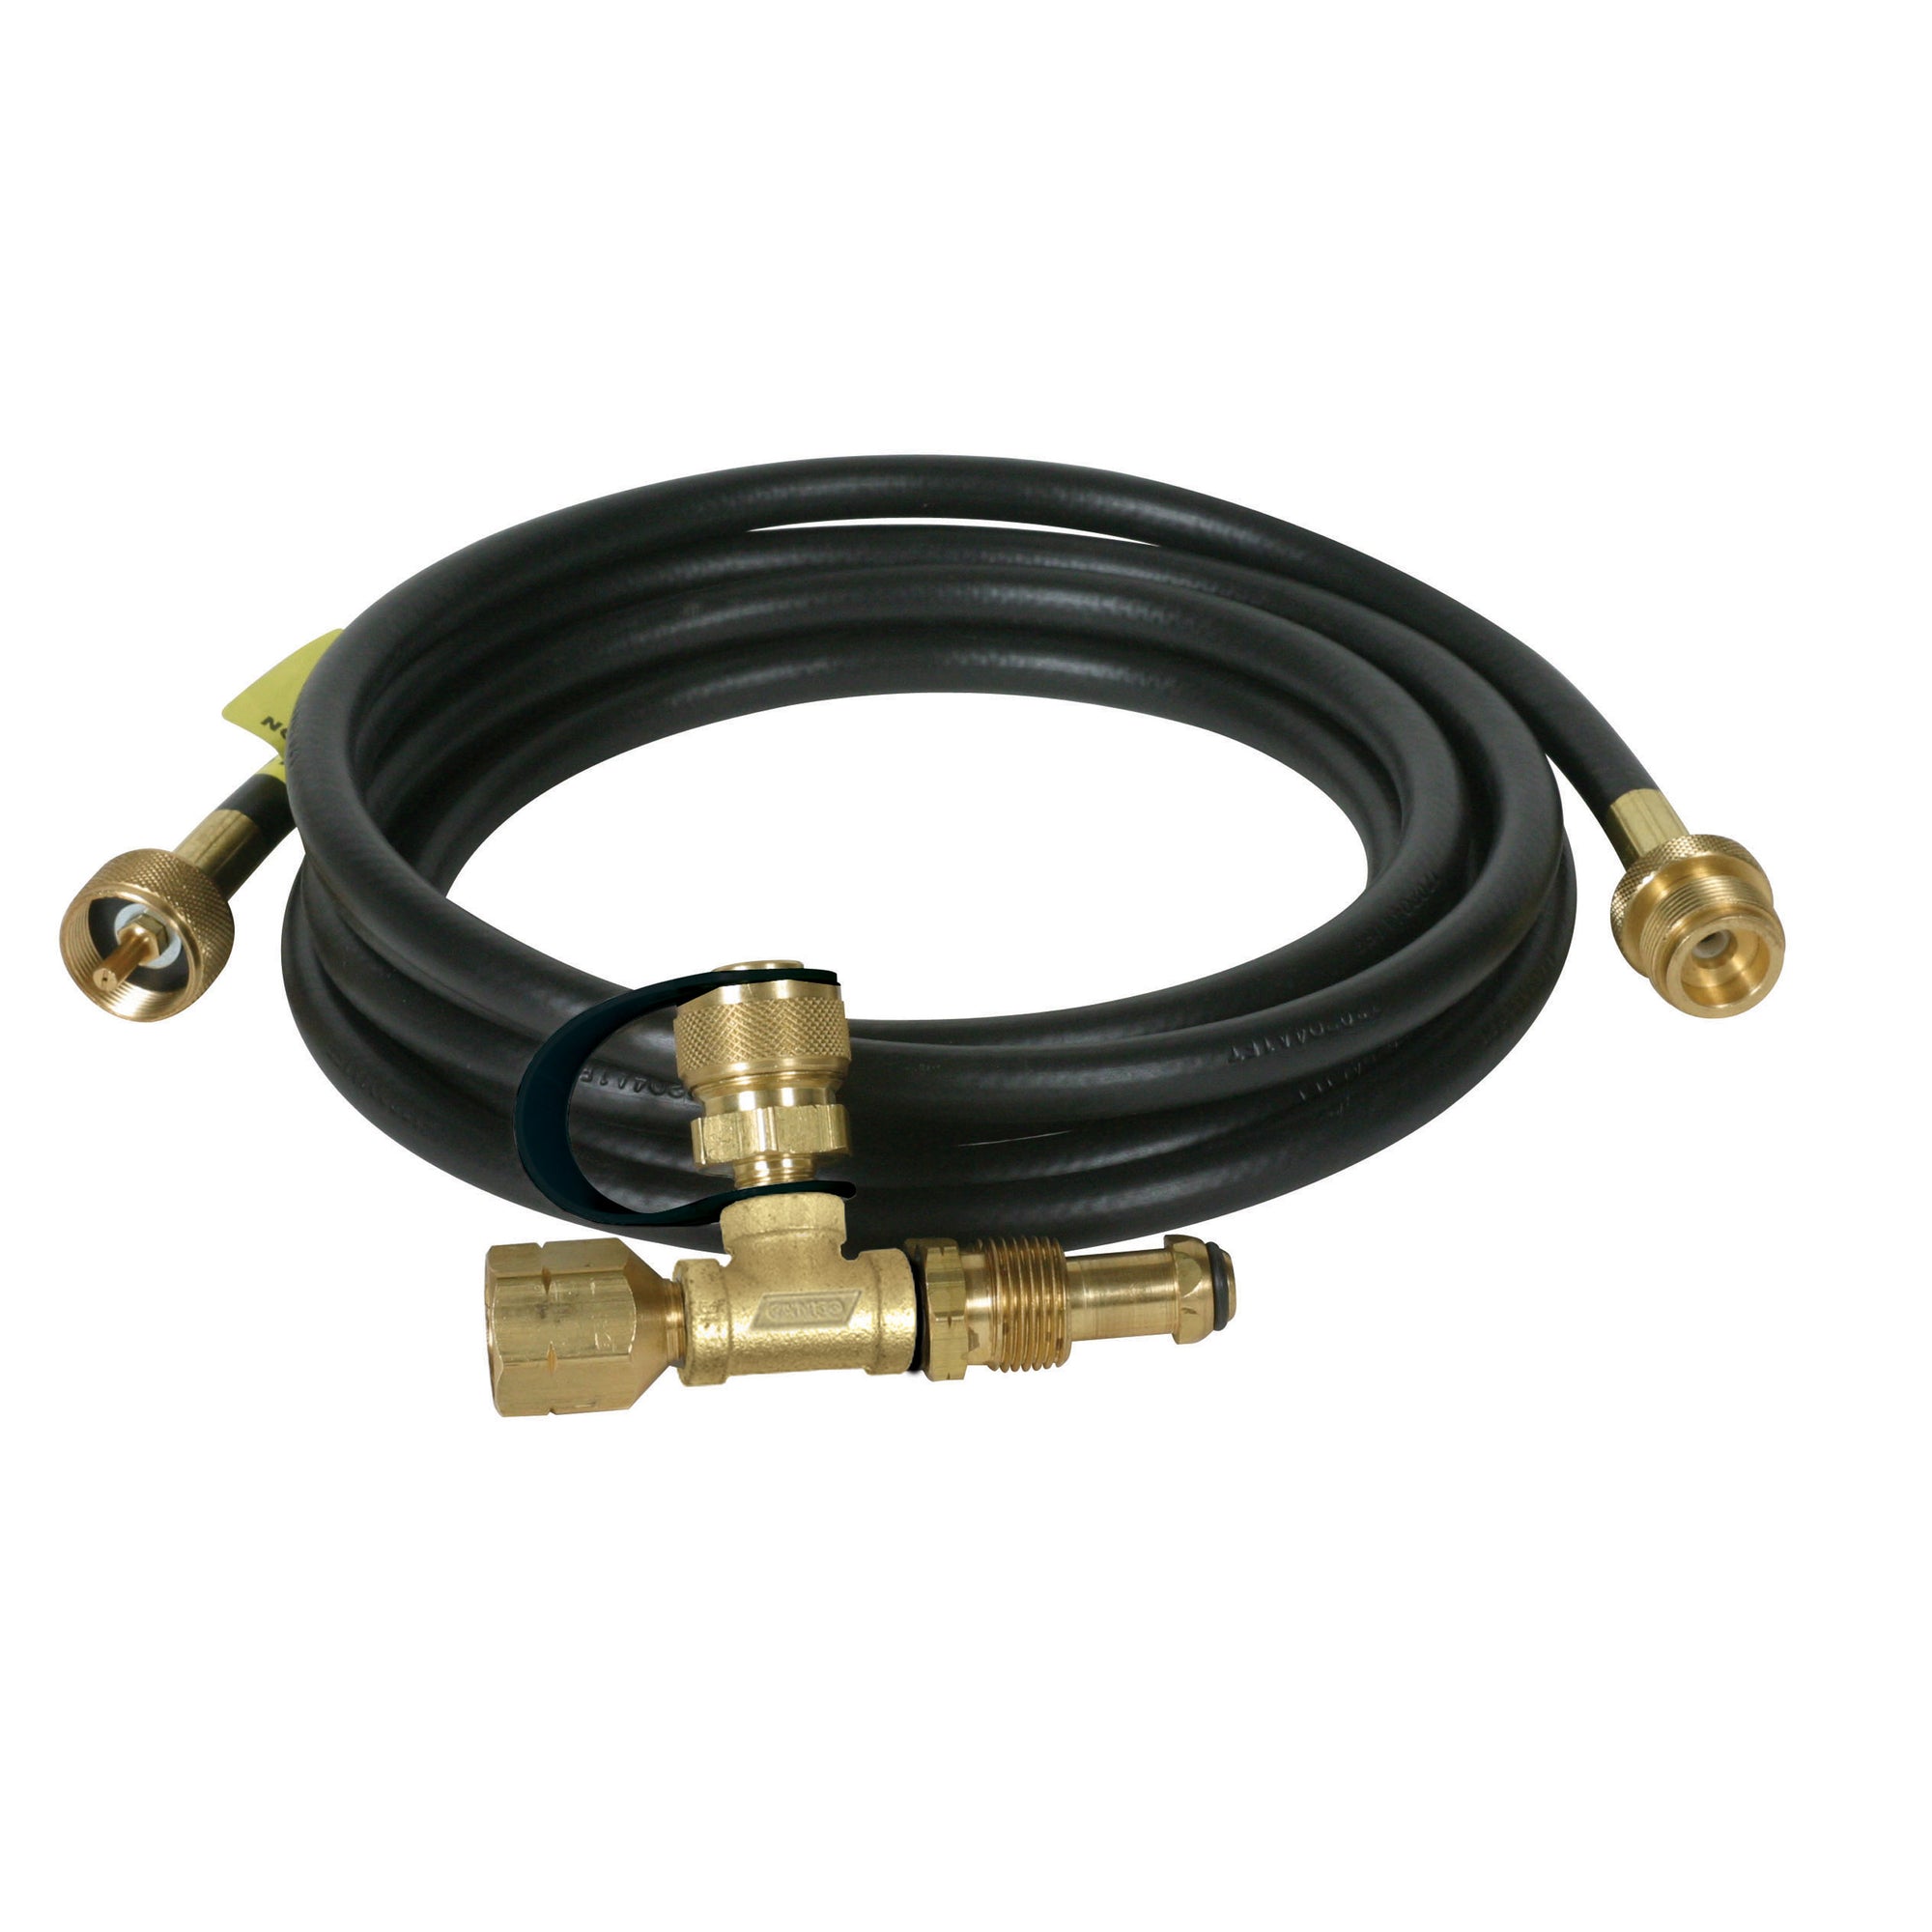 Camco 59103 Brass Tee with 3 Ports and 12' Hose